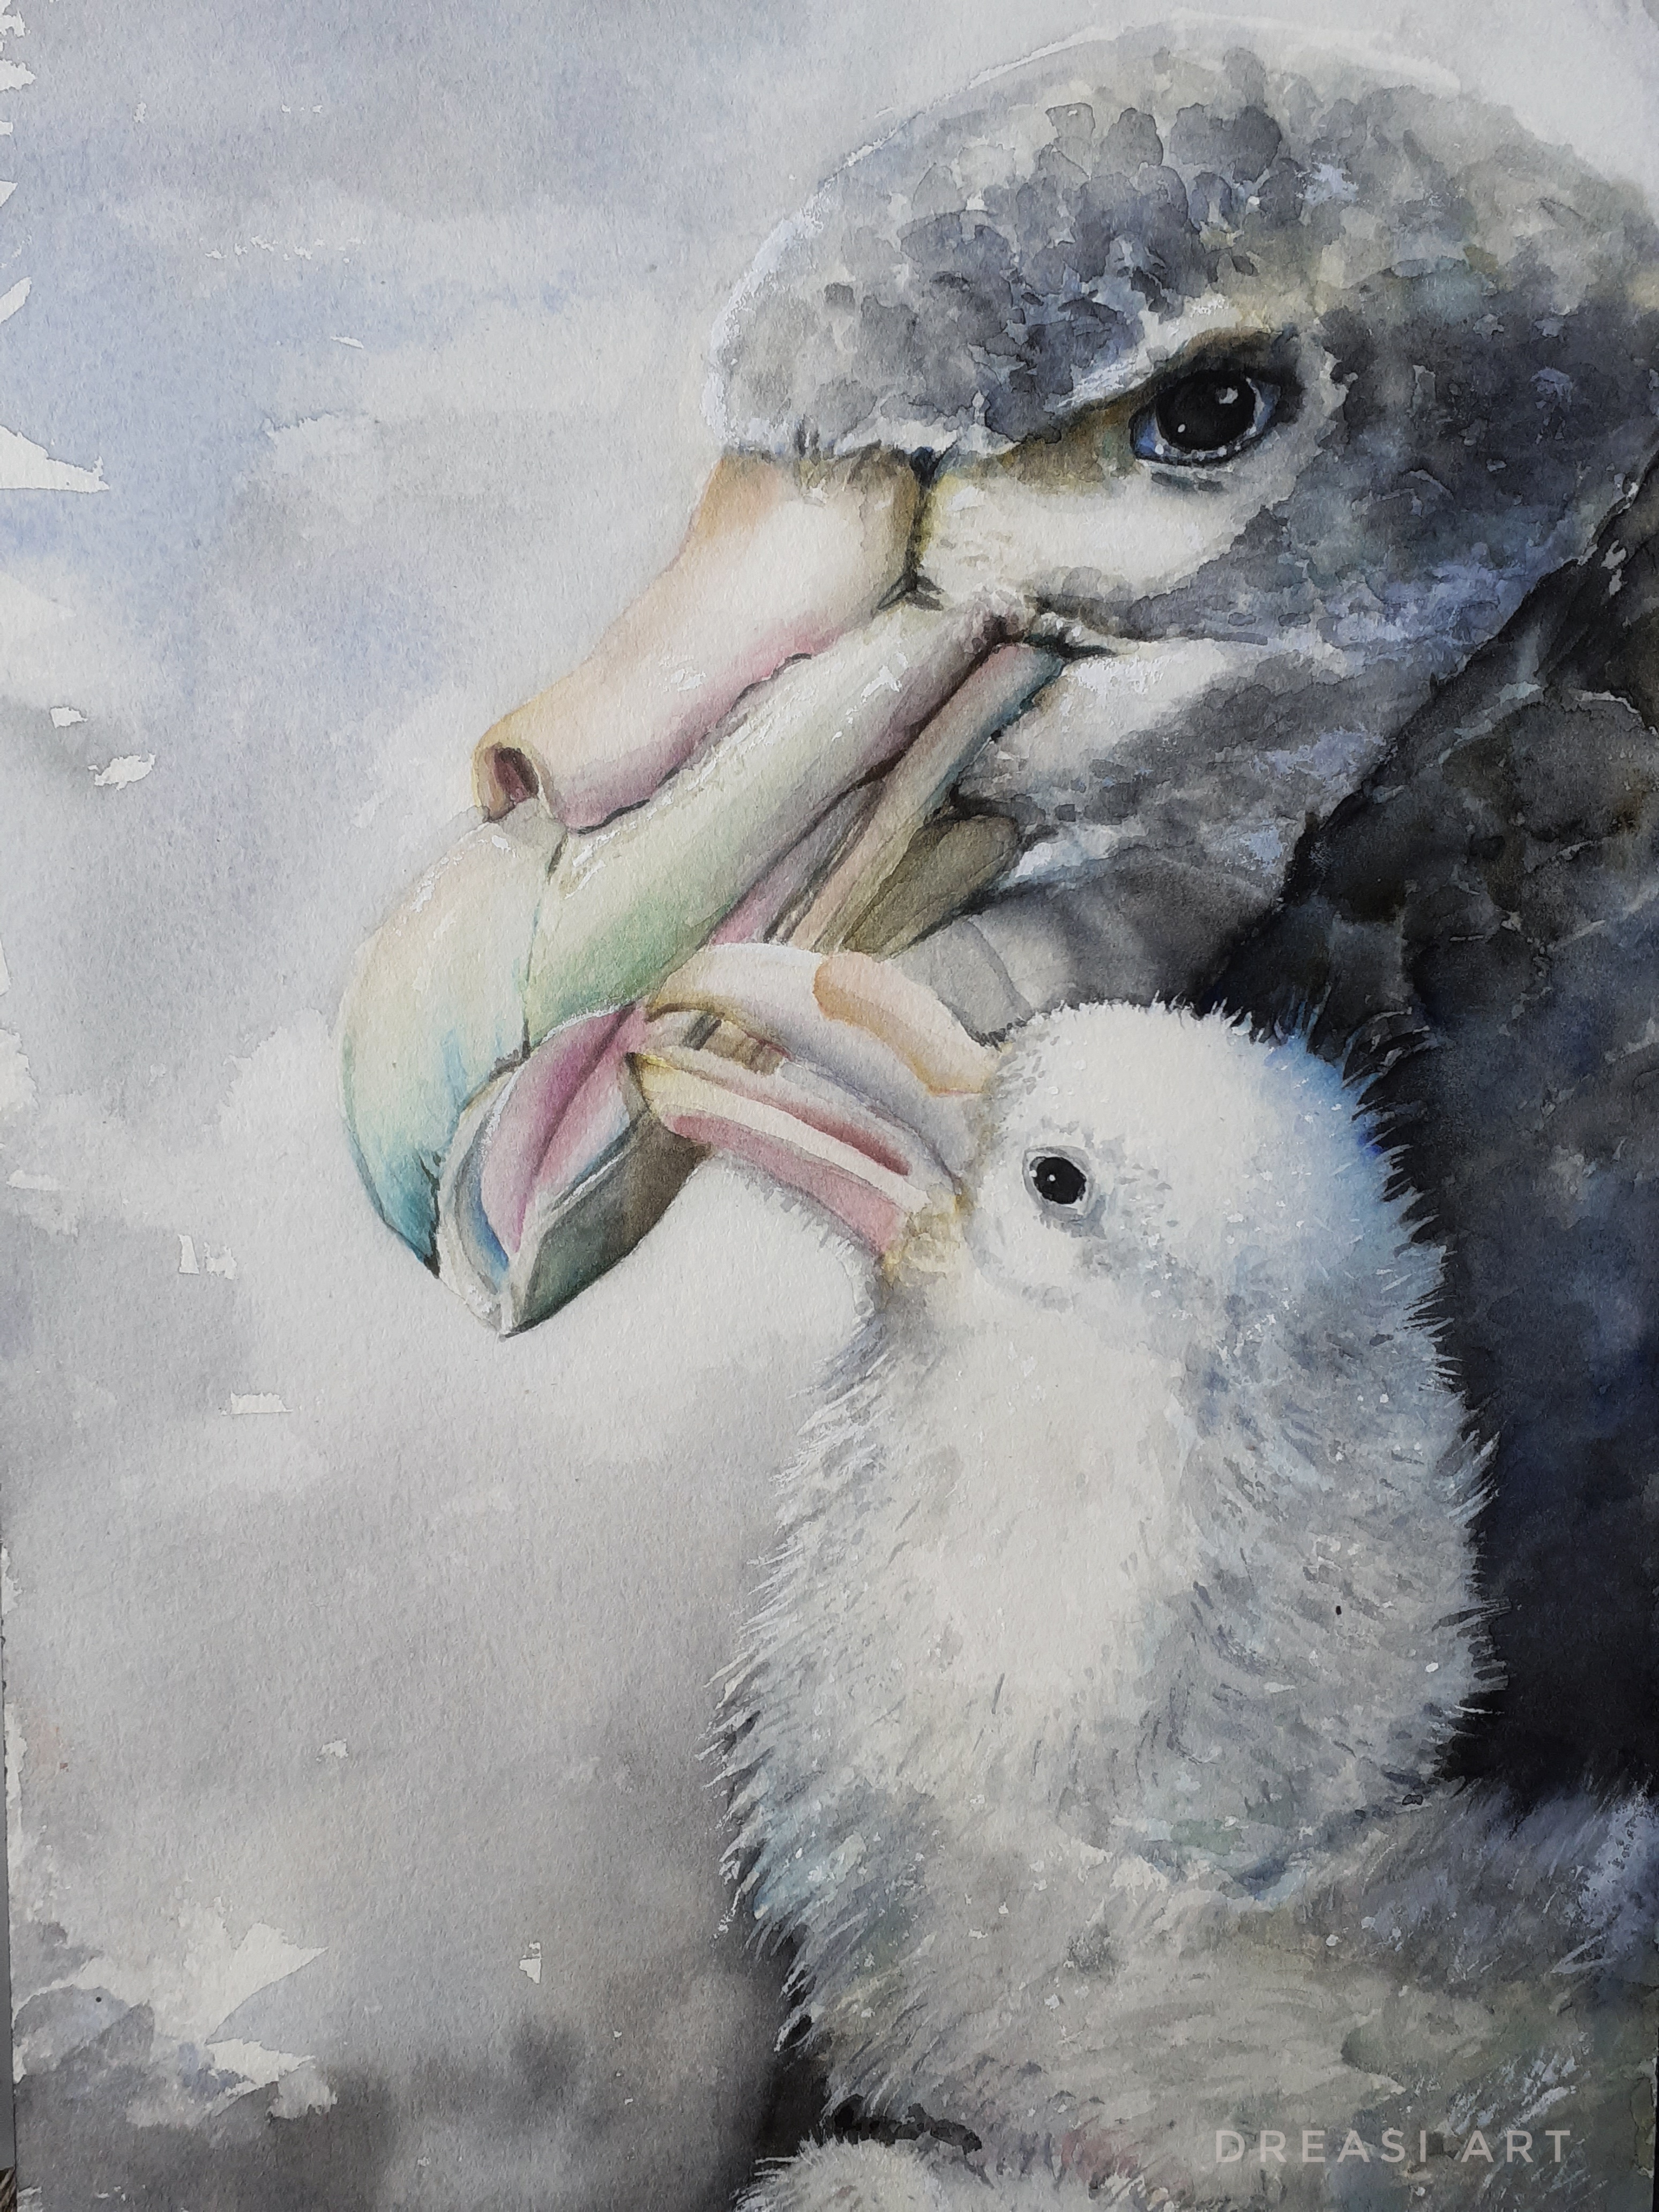 Andrea Siemt Southern Giant Petrel Schmincke Aquarell on Sanders Waterford 300 g rough 31 x 23 cm Gough Michelle Risi